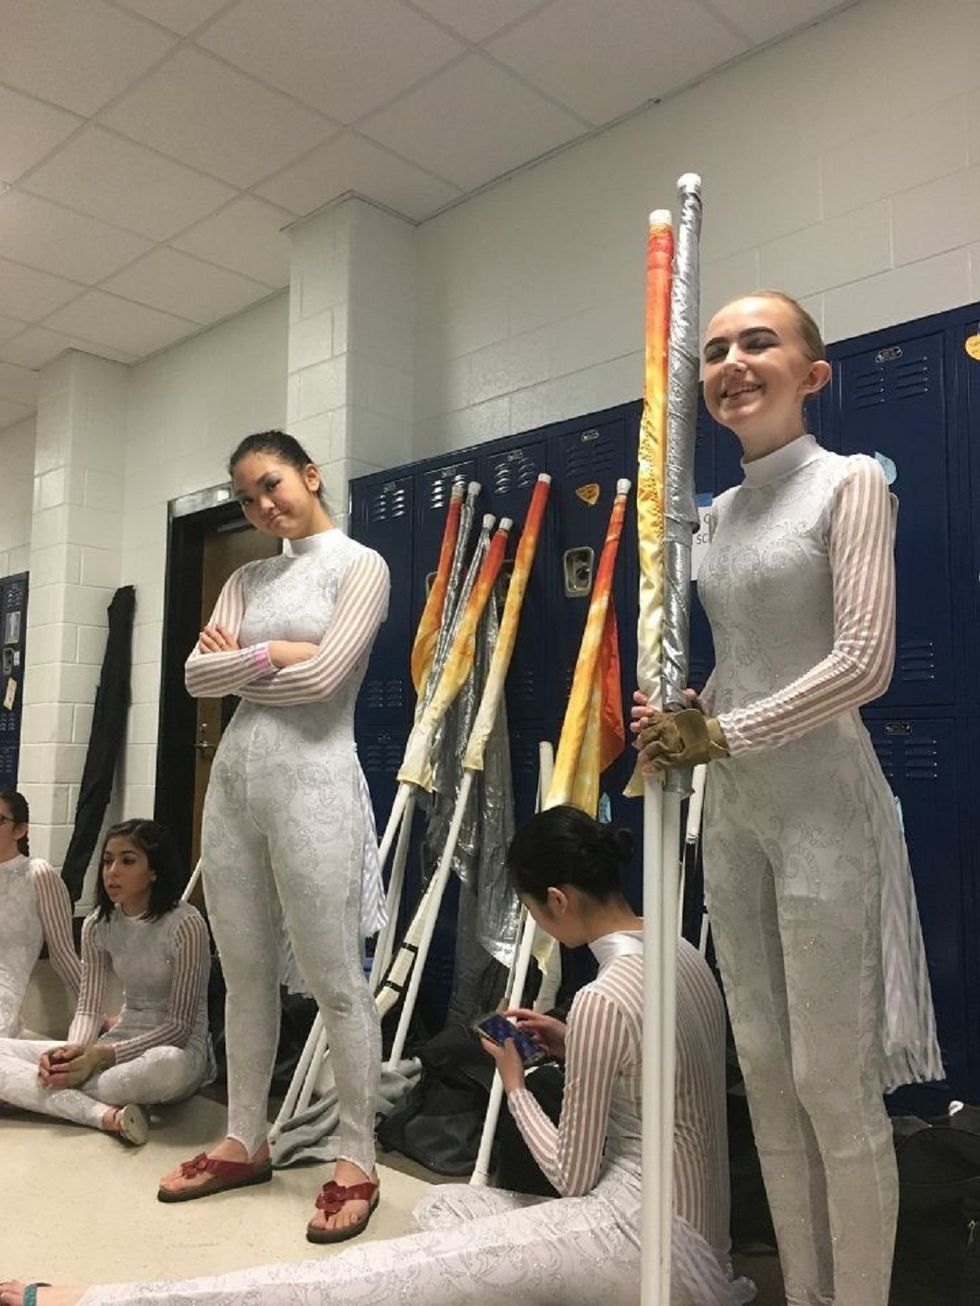 11 Moments From Winter Guard That Make Me Want To Stag Leap Out Of the Stadium